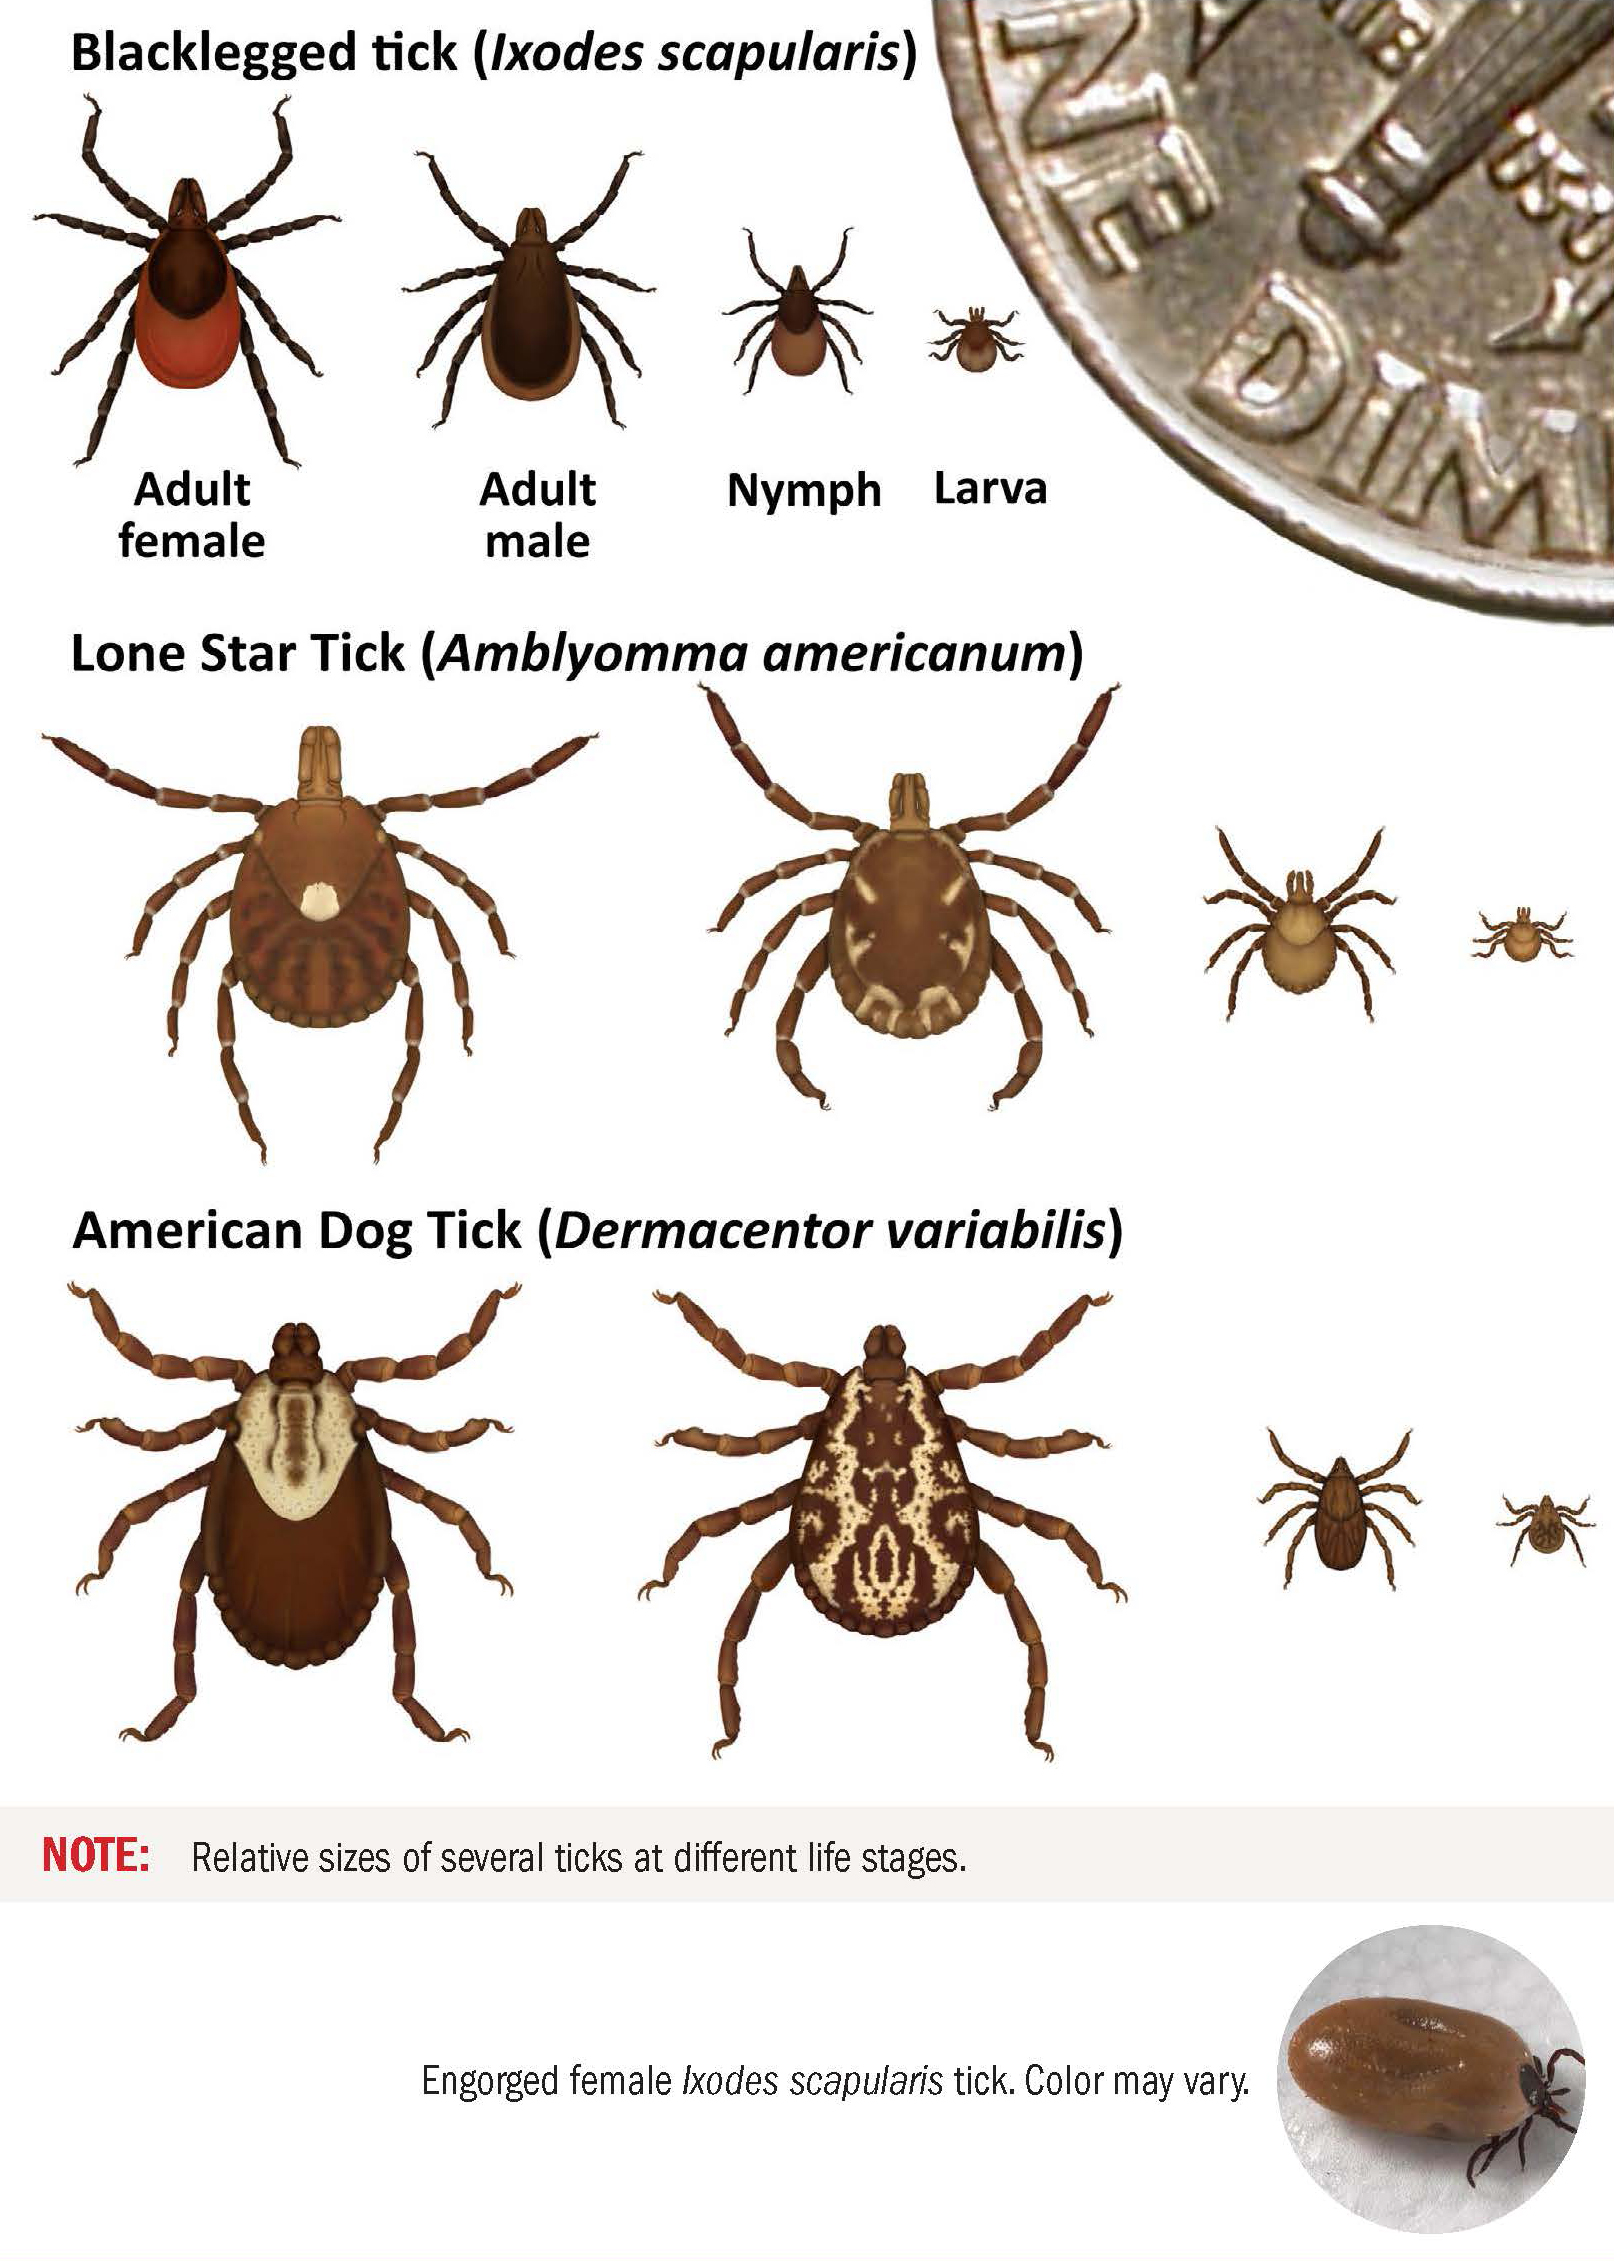 A diagram of common ticks. First row is blacklegged tick; adult male, adult female, nymph, larva; coloration of dark brown and light brown abdomen, large wide abdomen, very small head, four pairs of legs. Second row is lone star tick; adult female, adult male, nymph, larva; coloration of light and dark brown mottled abdomen with a singular white dot in the center, four pairs of brown legs, large wide abdomen, very small head. Third row is american dog tick; adult female, adult male, nymph, larva; coloration is dark brown and white mottled, large wide abdomen, very small head, four pairs of legs. Note: relative sizes of several ticks at different life stages. Engorged female ixodes scapularis tick. Color may vary. Photograph; large round wide abdomen, small black head, four pairs of legs.